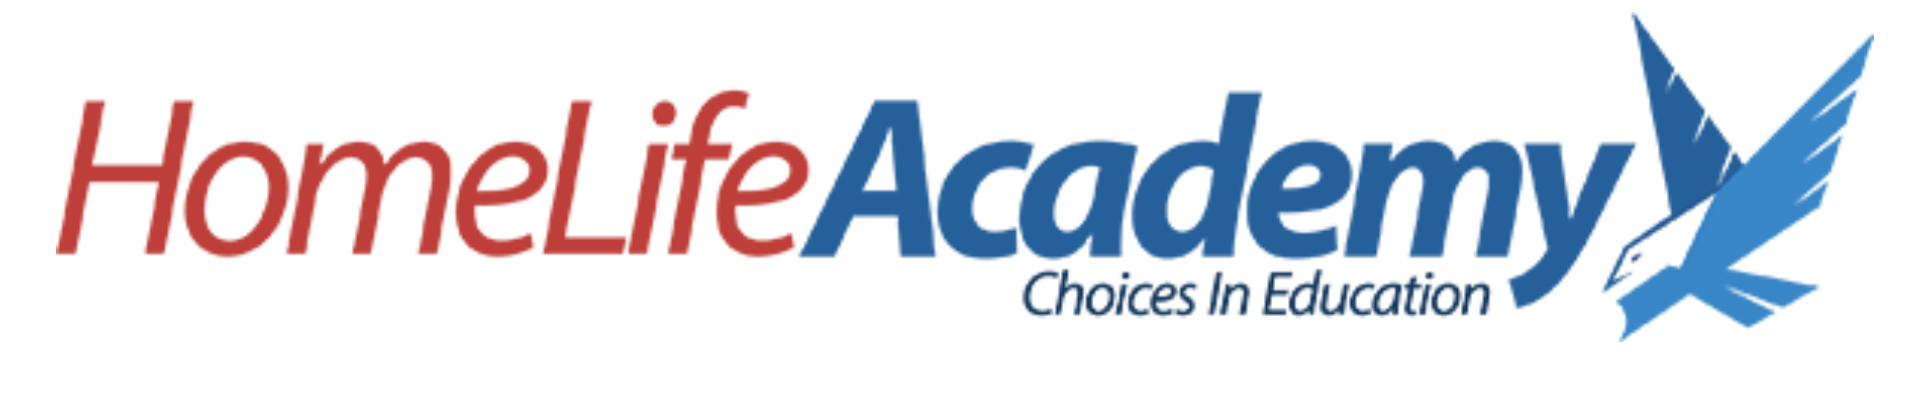 HomeLife Academy Choices in Education Logo